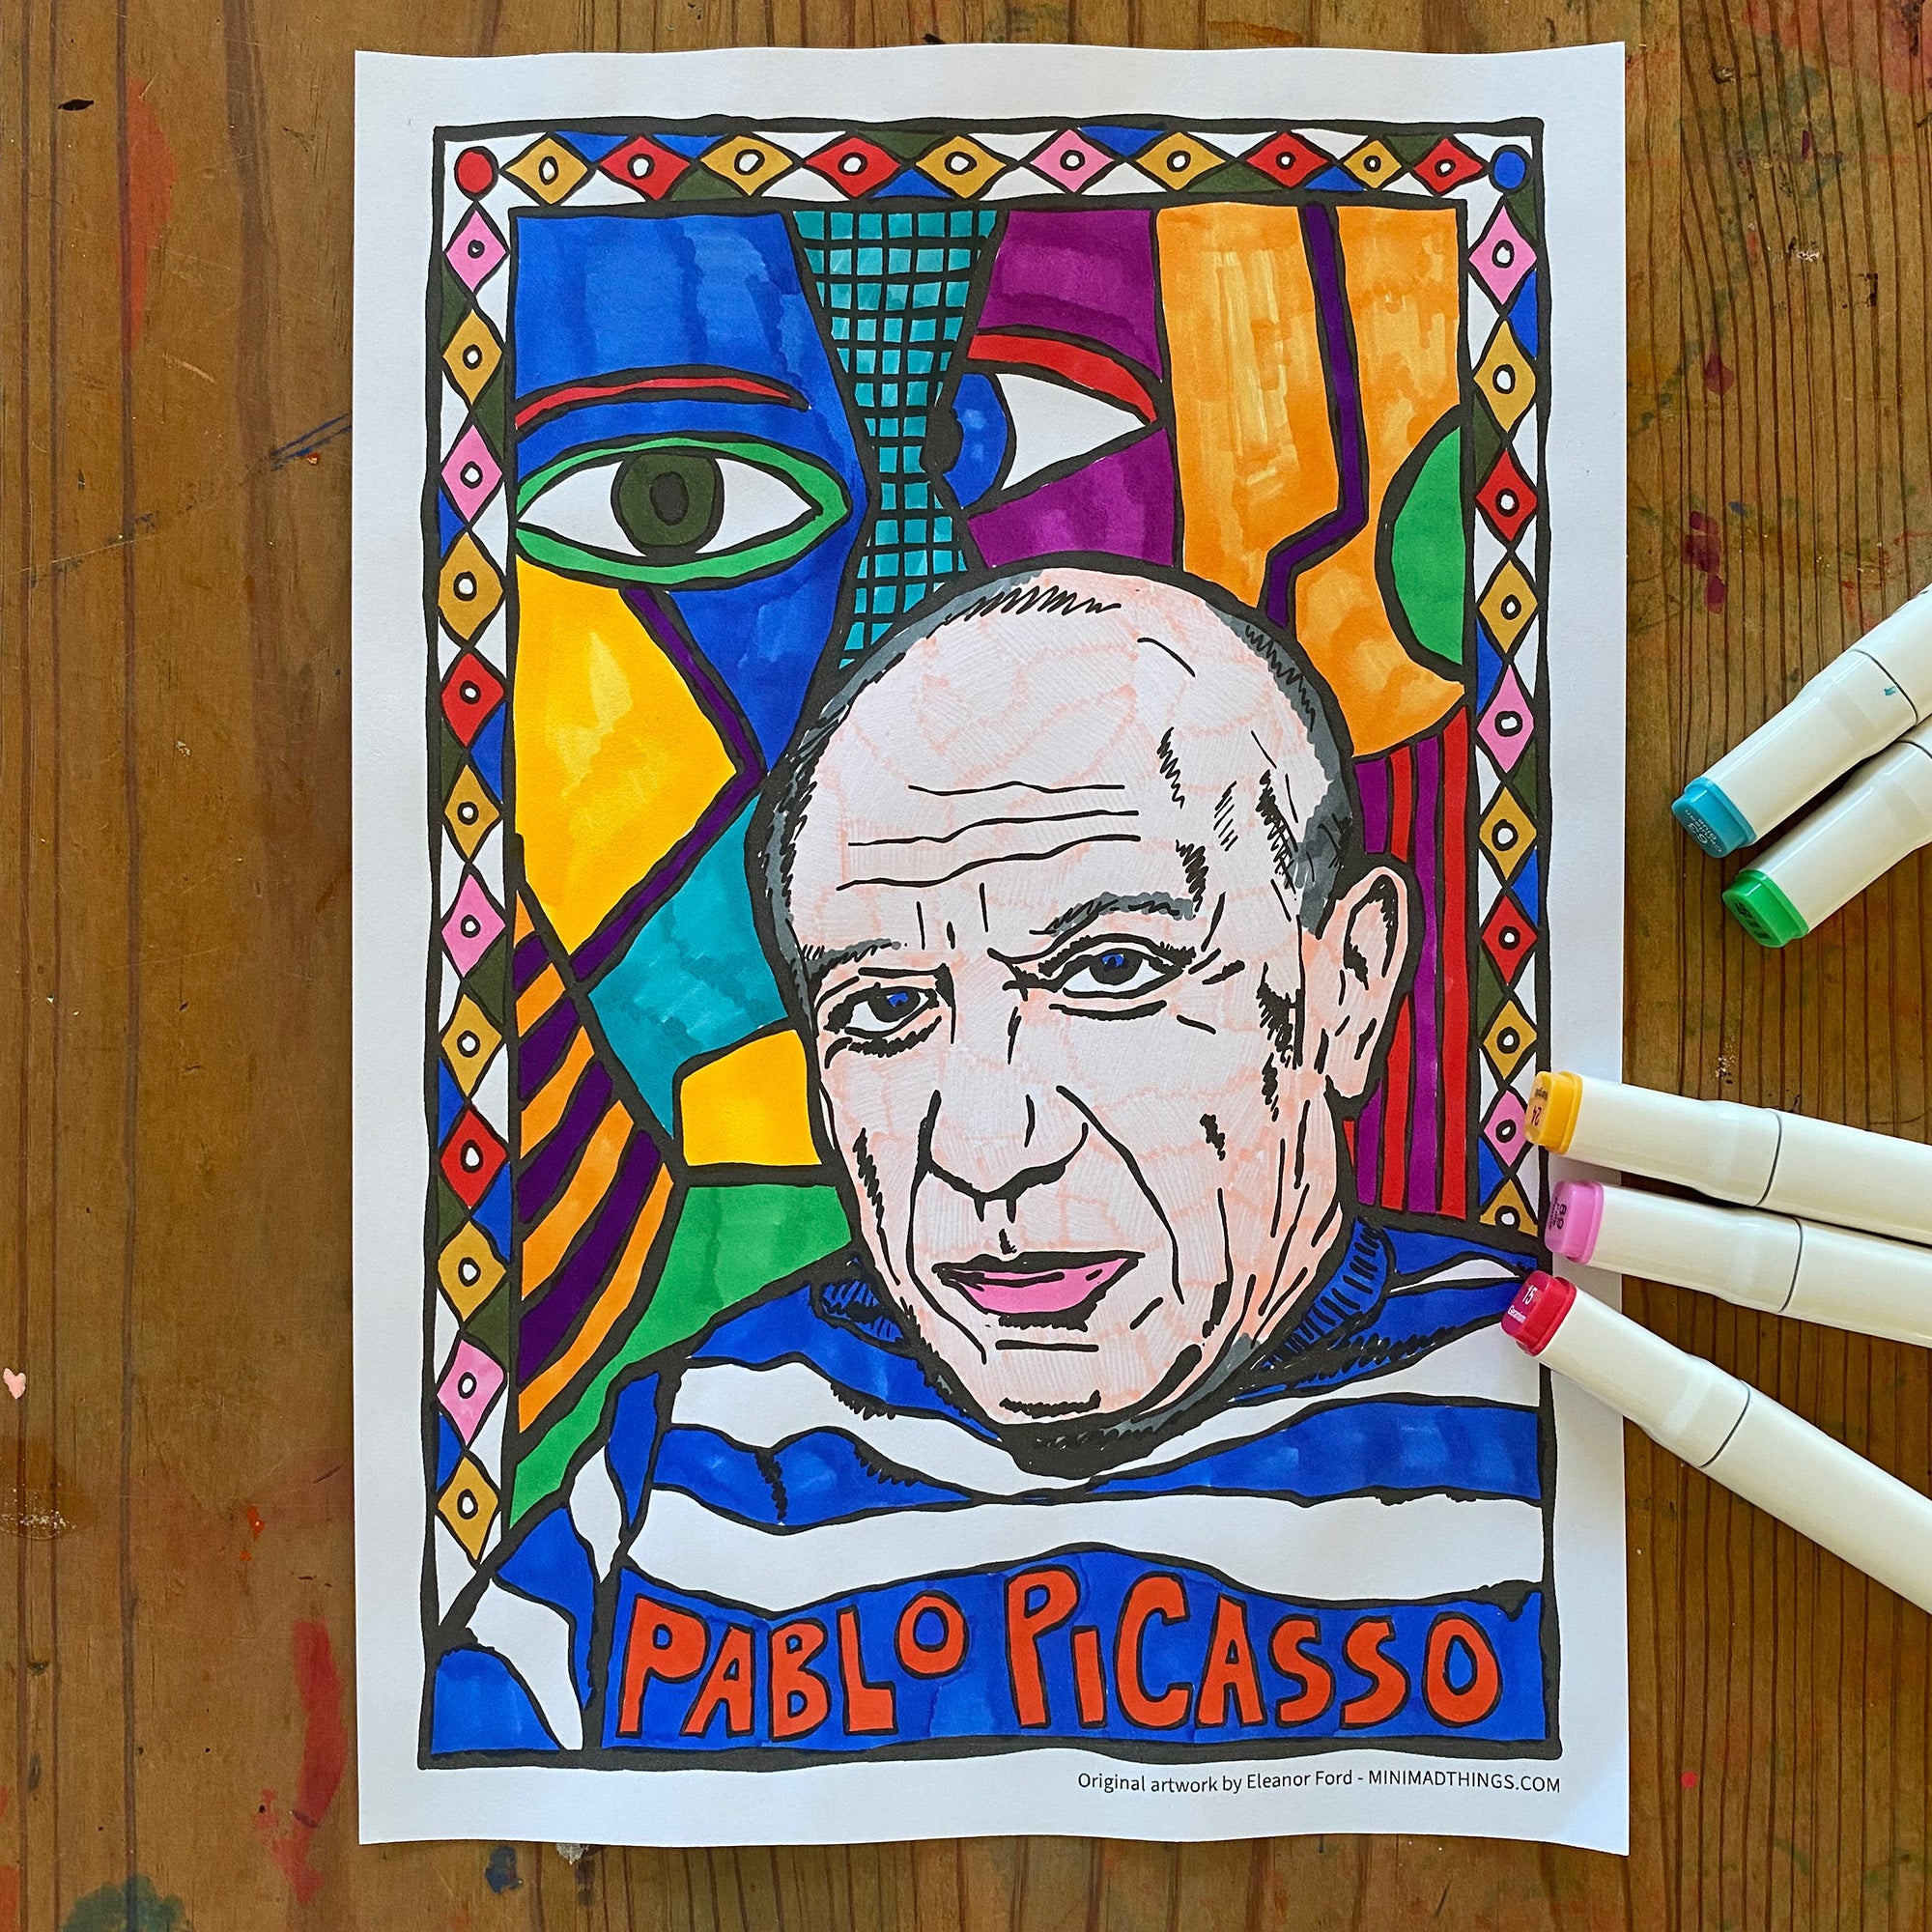 Pablo Picasso - Printable activity pack